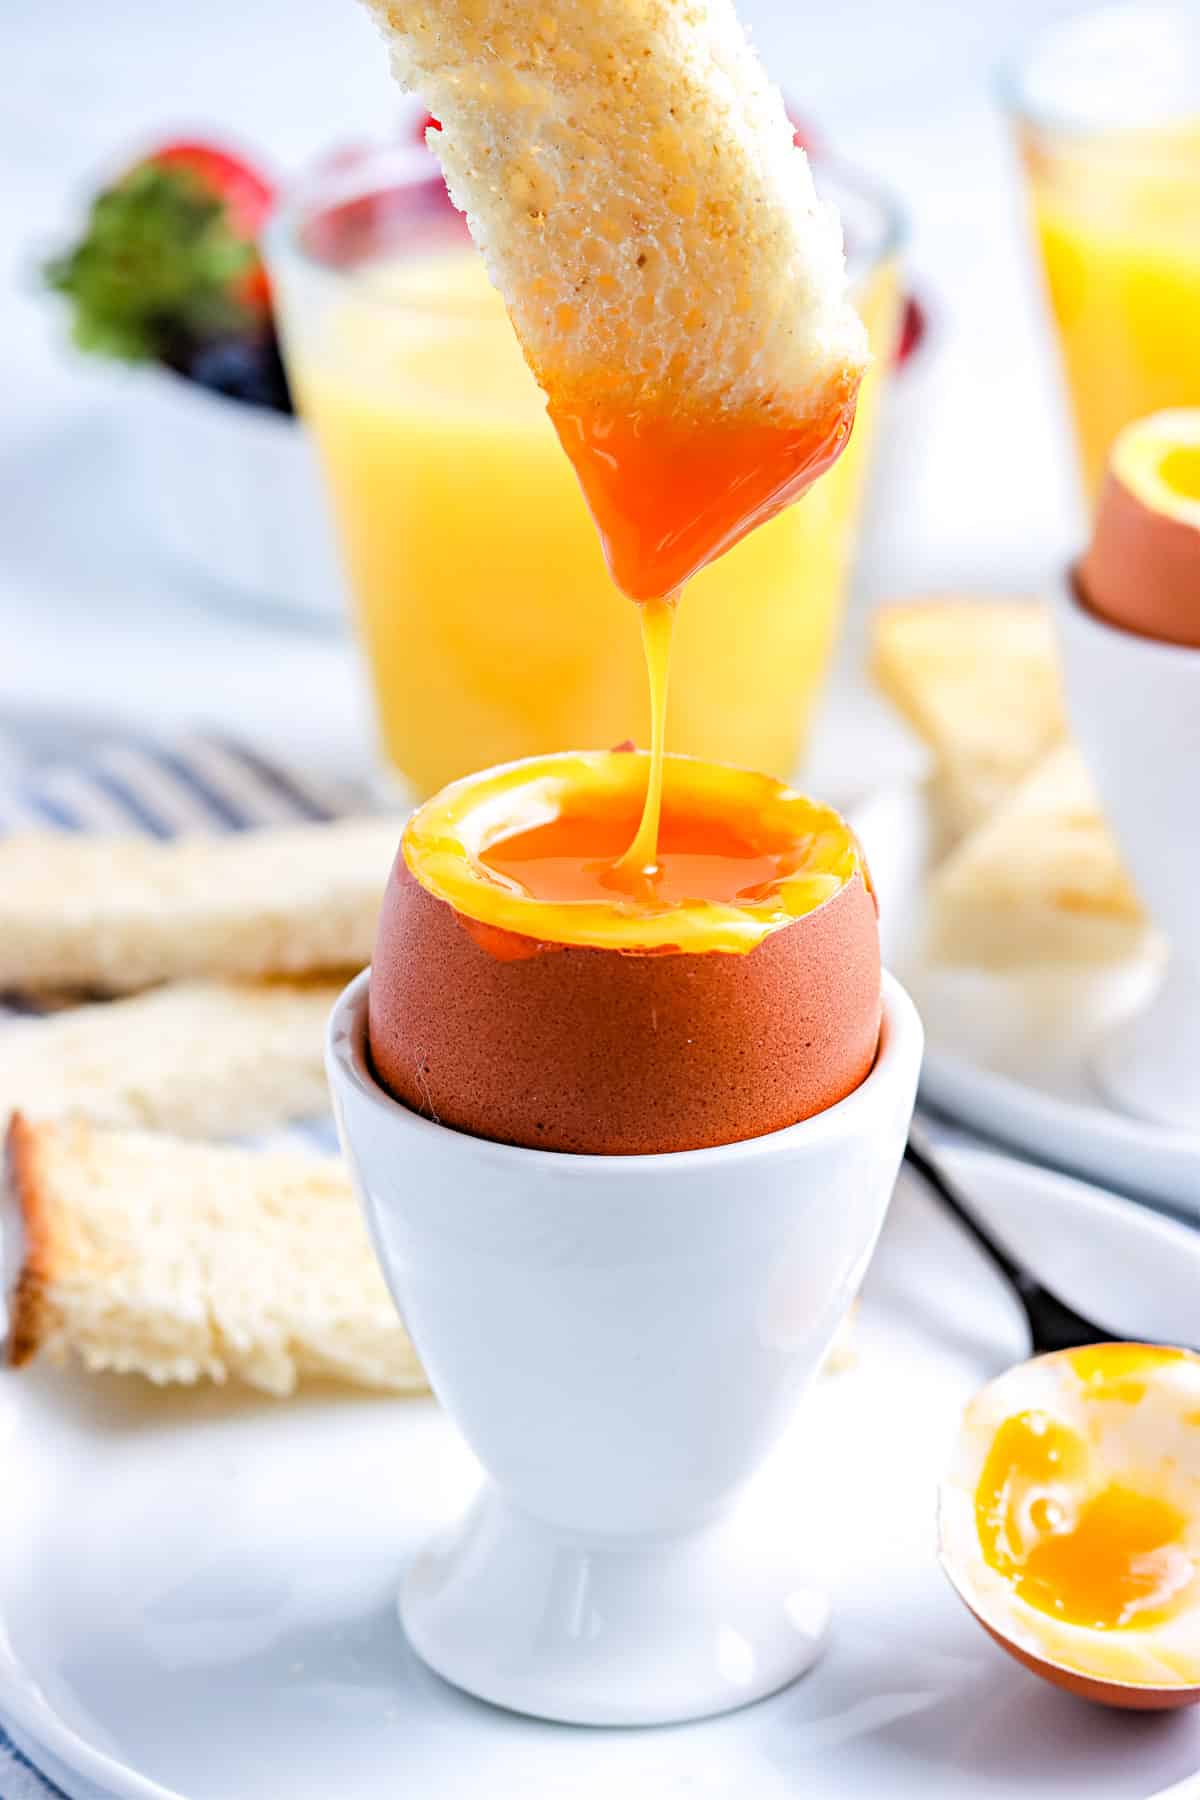 Toast being dipped into the soft boiled egg yolk. 